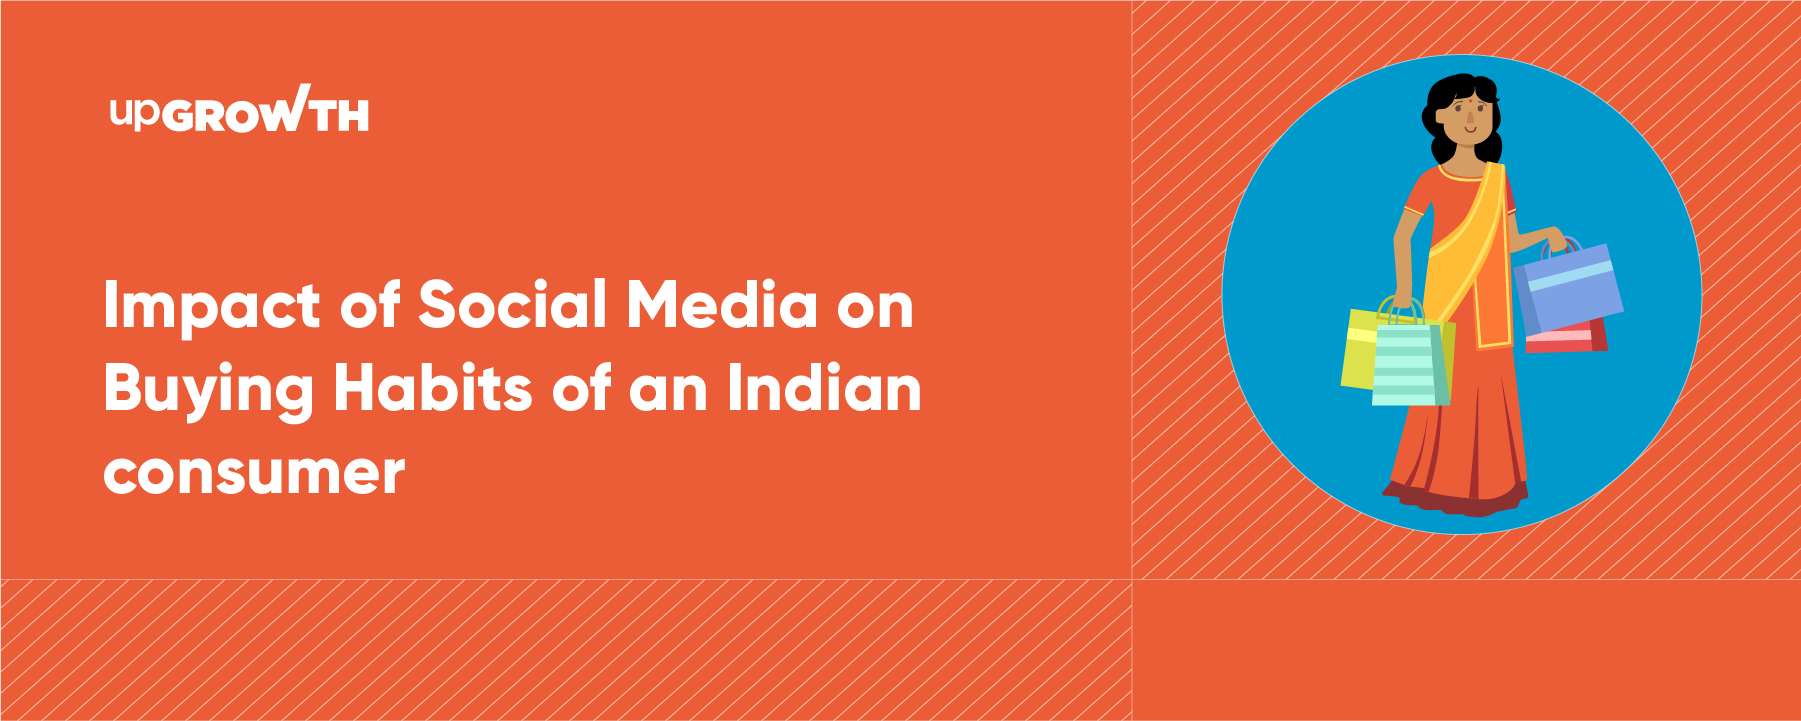 Impact of Social Media on Buying Habits of an Indian consumer